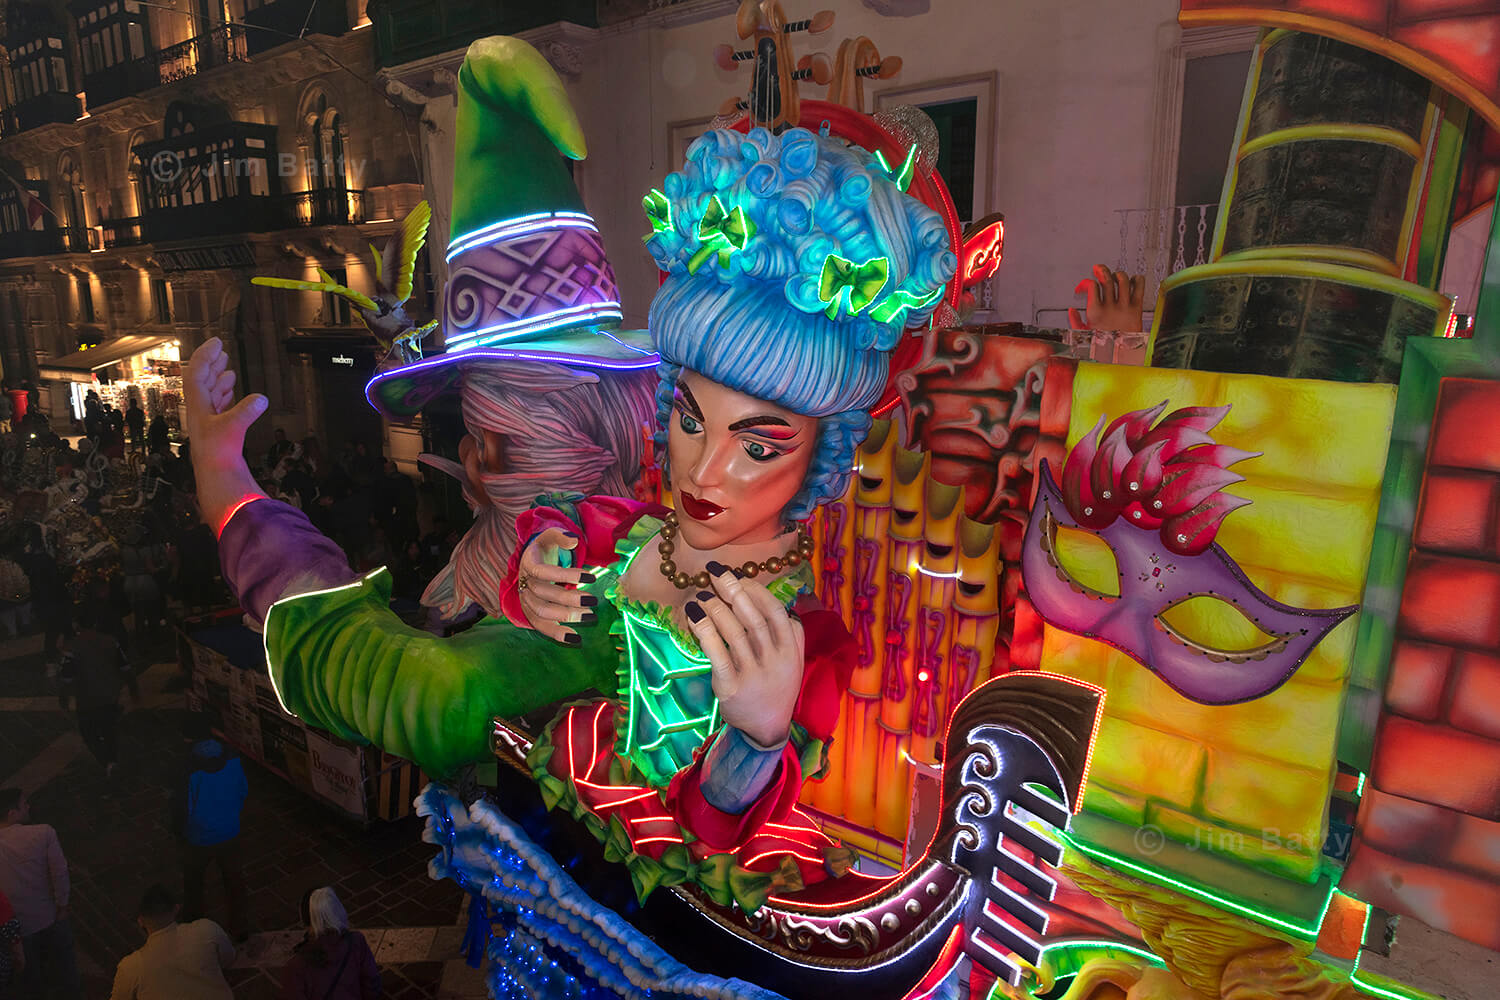 Brightly coloured and illuminated float at night in the streets at the Valetta Carnival: depicting figures in a Venetian gondola